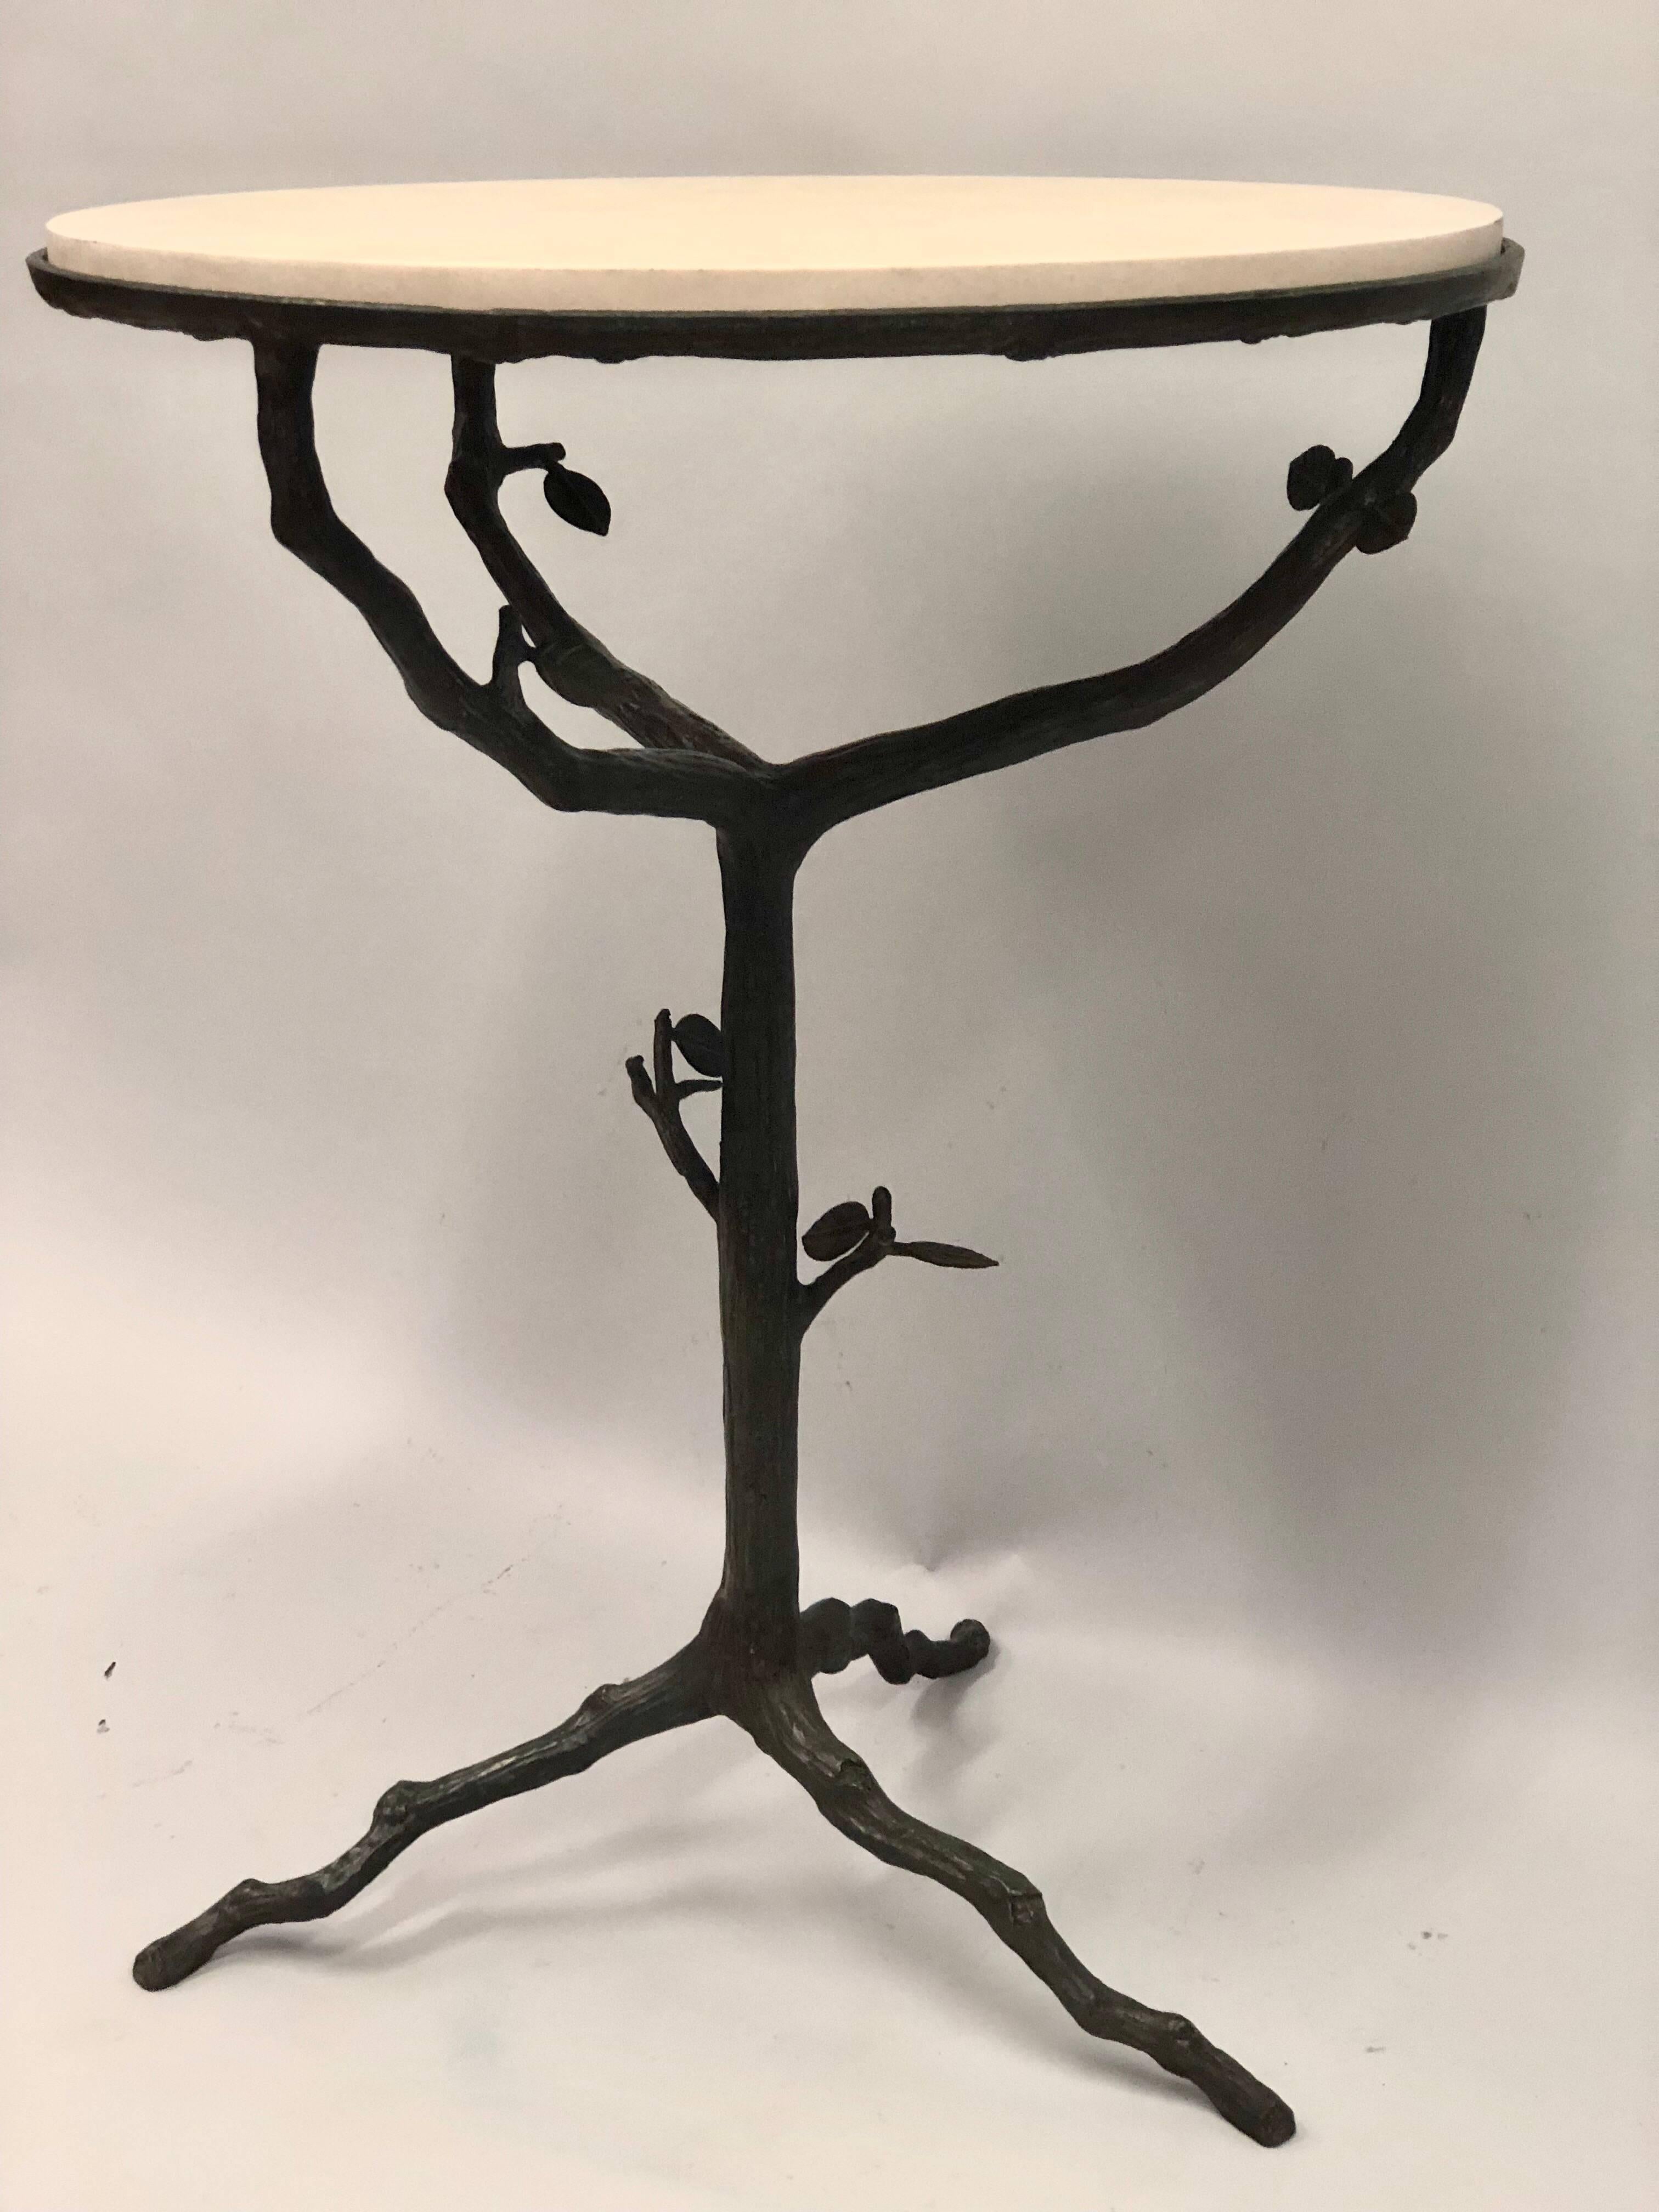 Elegant, Iconic Pair of French Mid-Century Modern side or end tables in bronze in the style of Alberto and Diego Giacometti.

The pieces feature a bronze organic form tripod base and stem with twig and leaf decoration characteristic of the